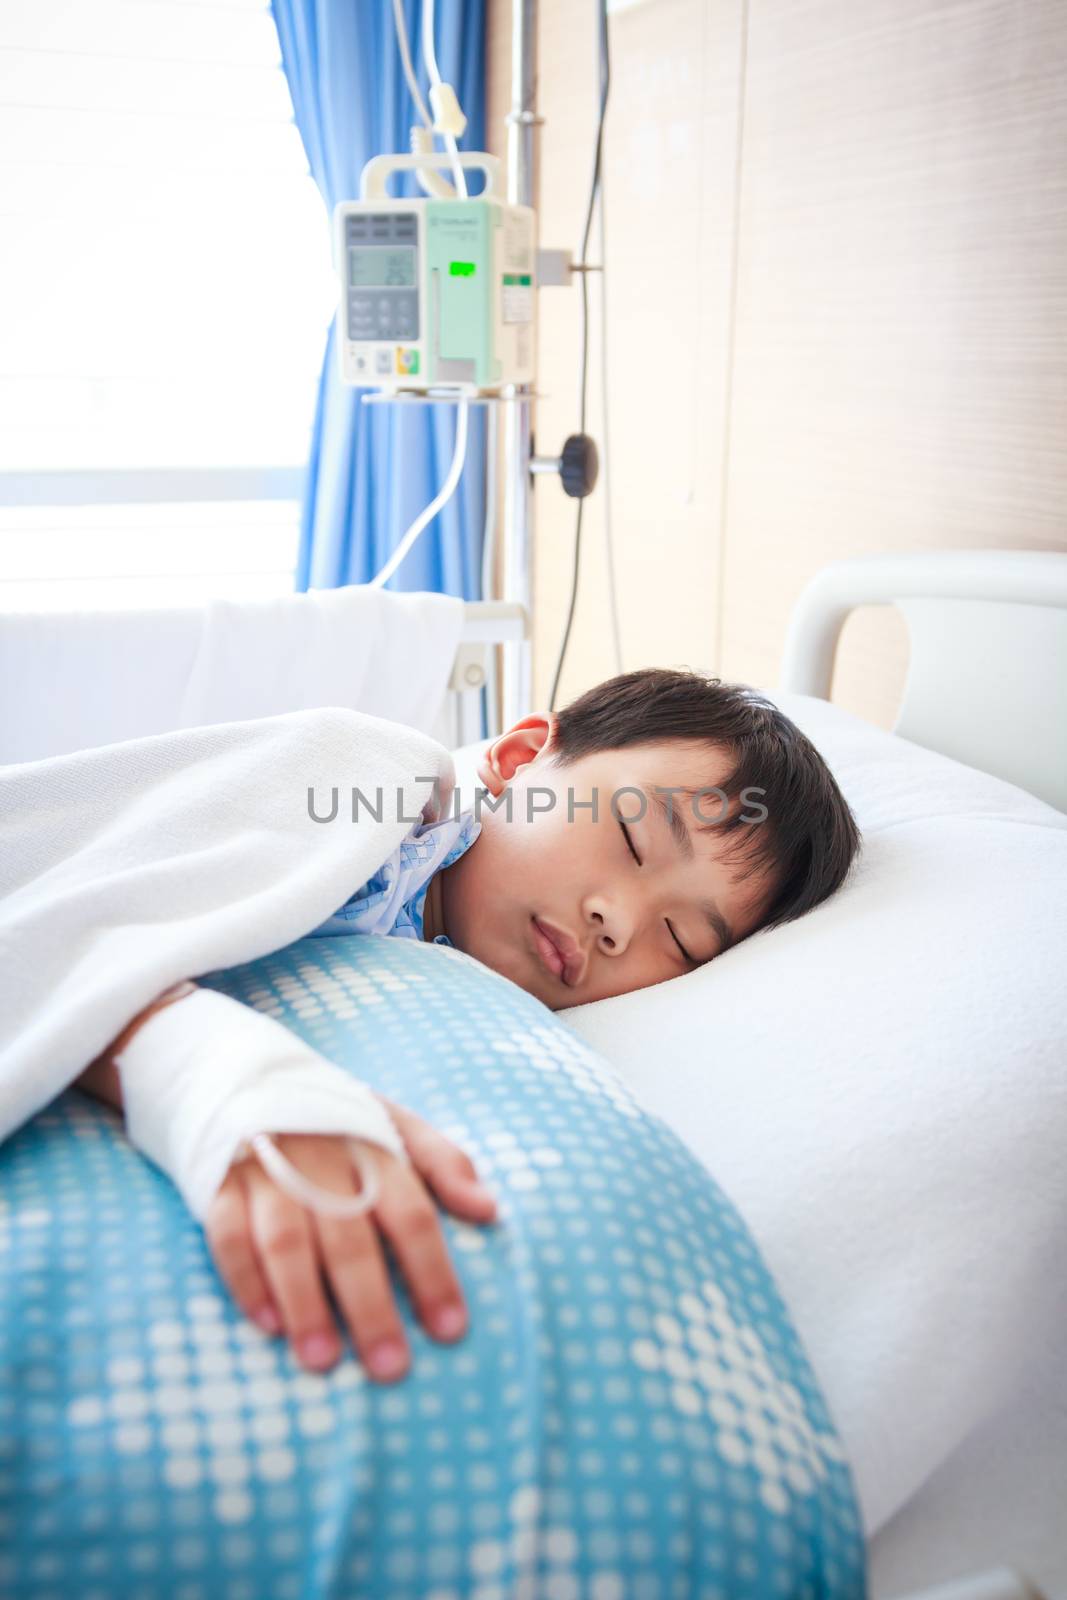 Illness asian boy sleeping at modern and comfortable equipped hospital room with saline intravenous (IV) on hand. Health care and people concept.